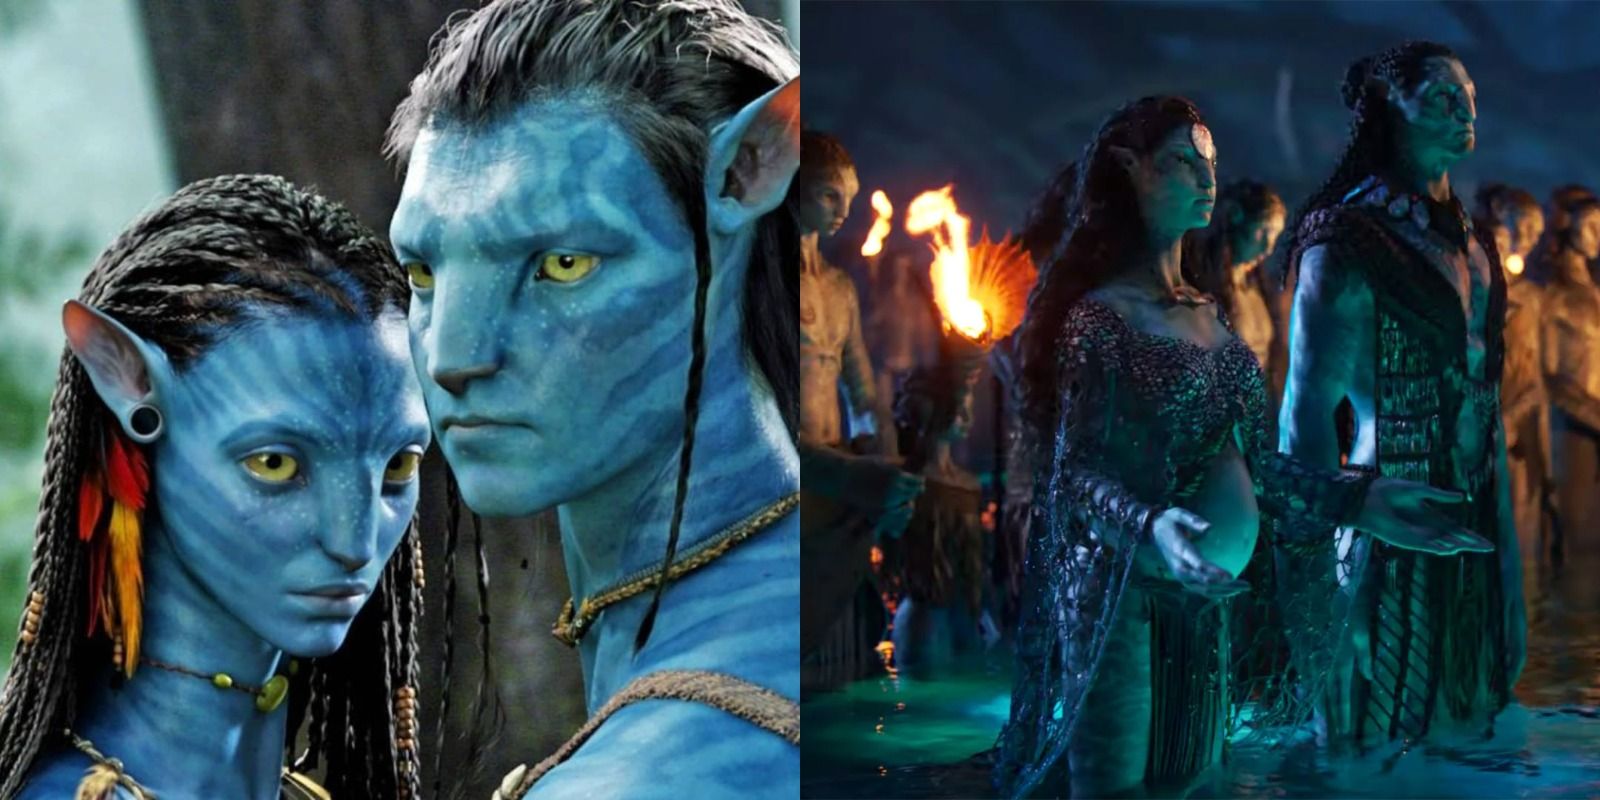 avatar-2-10-meme-reactions-to-the-trailer-release